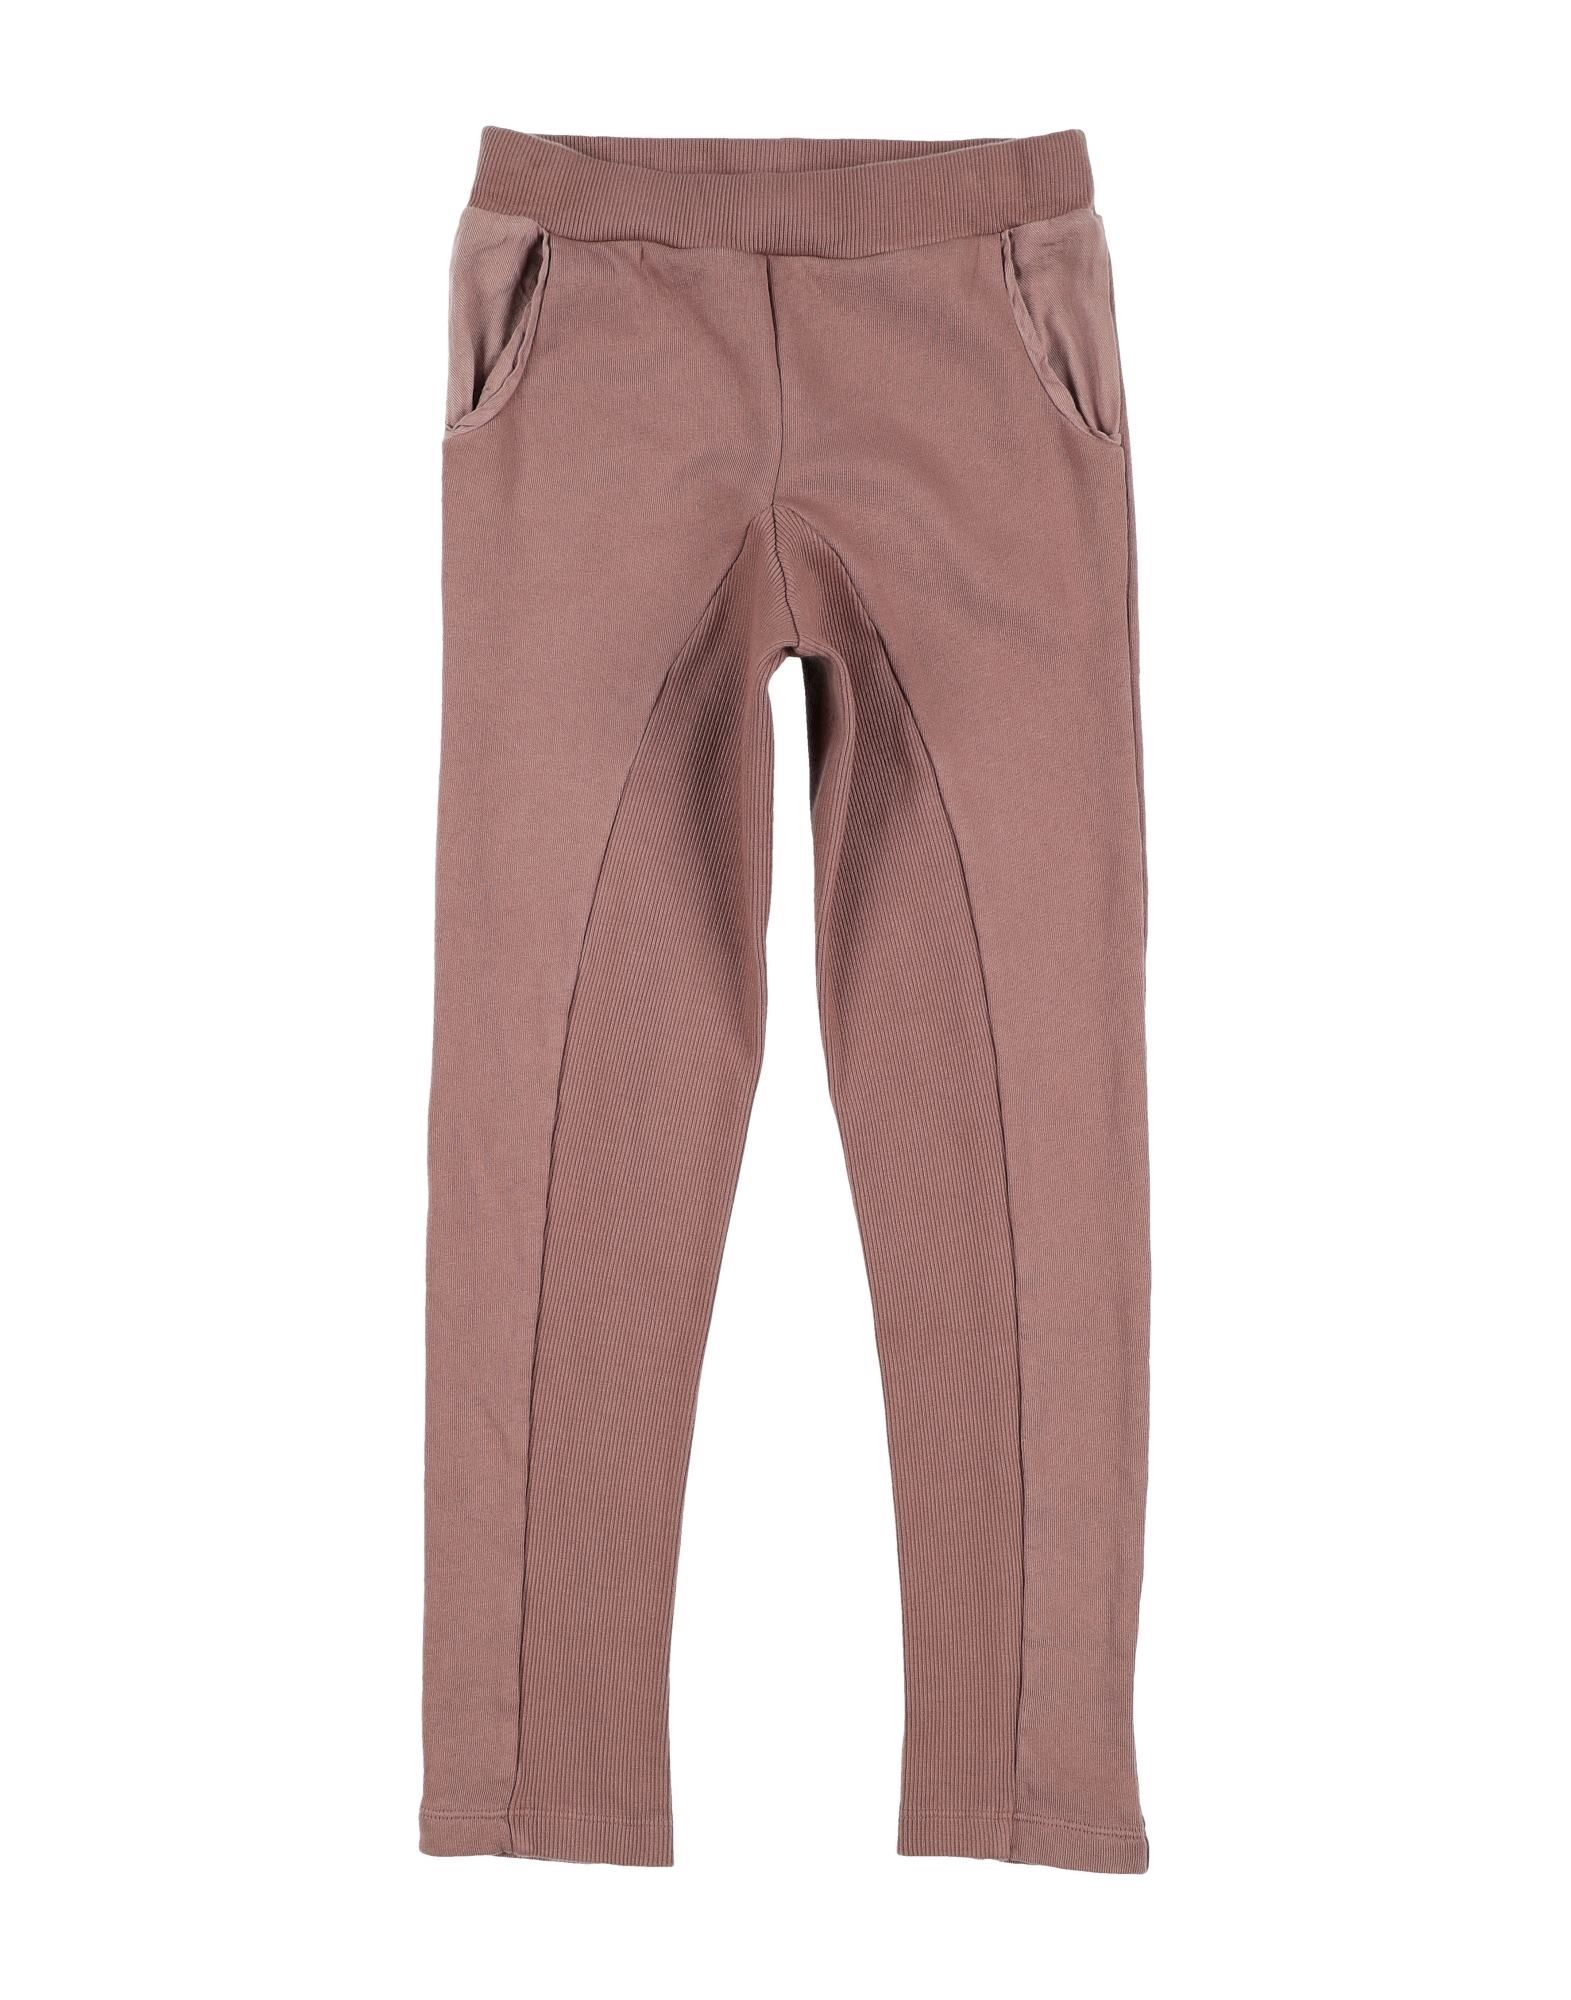 Miss Pois Kids' Pants In Light Brown